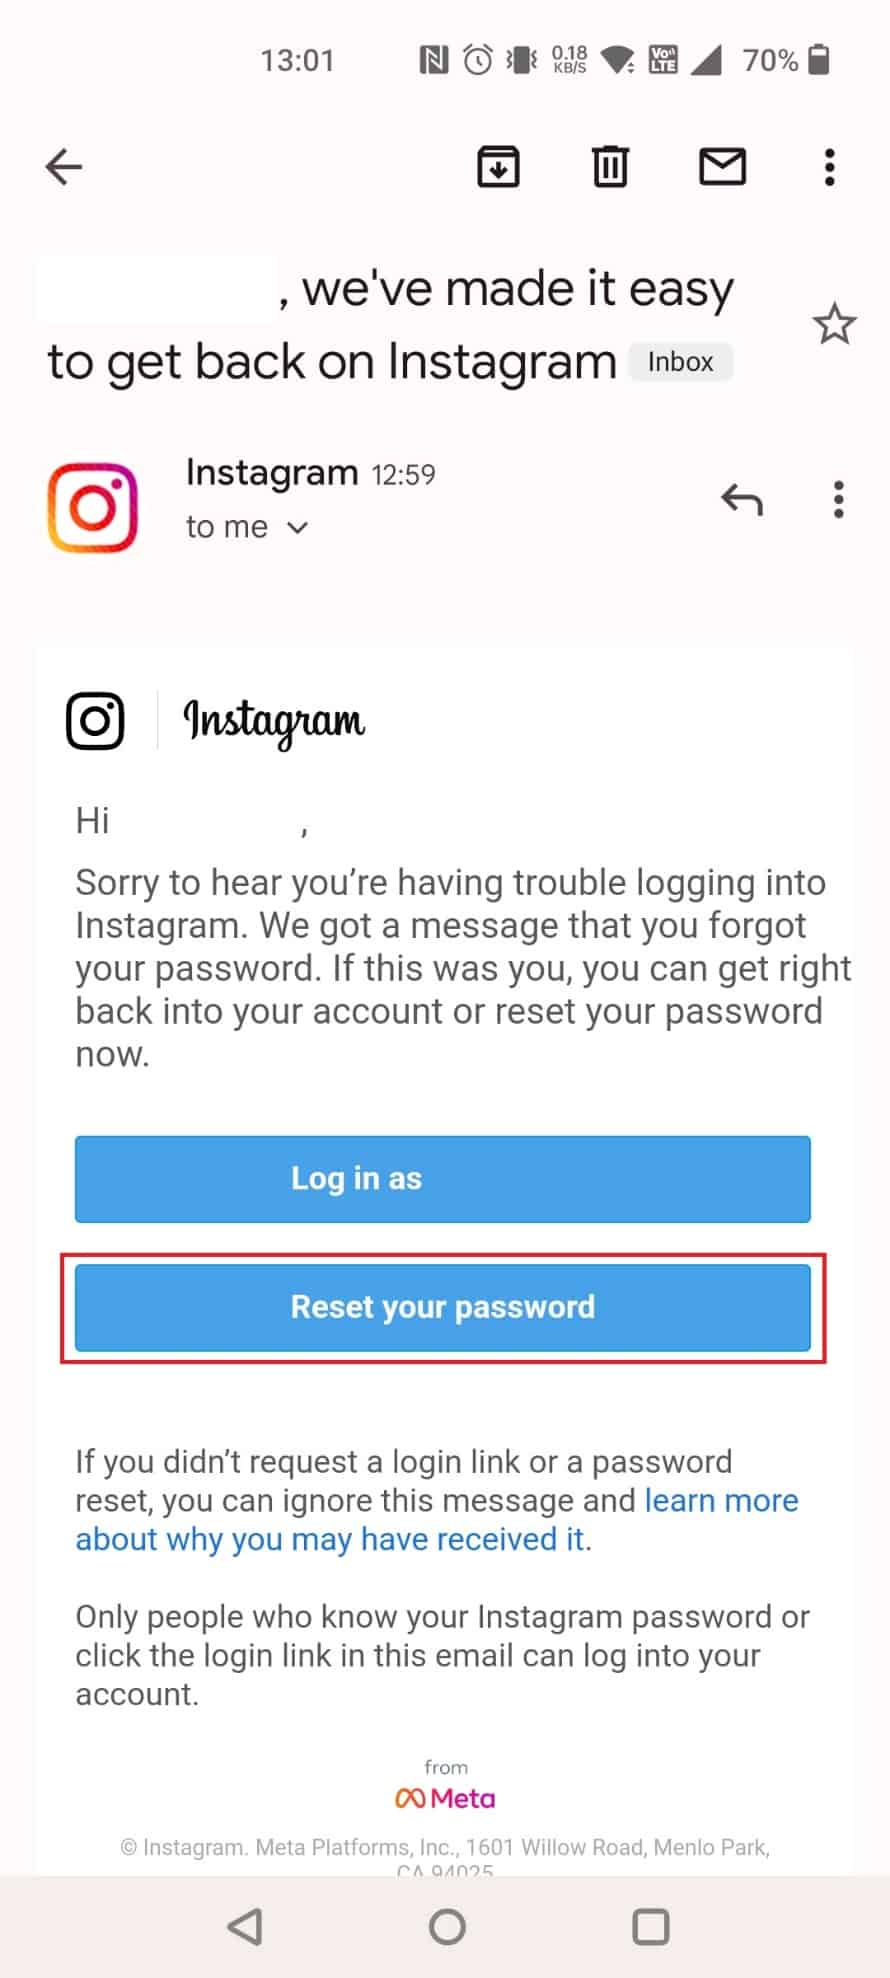 Open the mail sent from Instagram and tap on Reset your password |